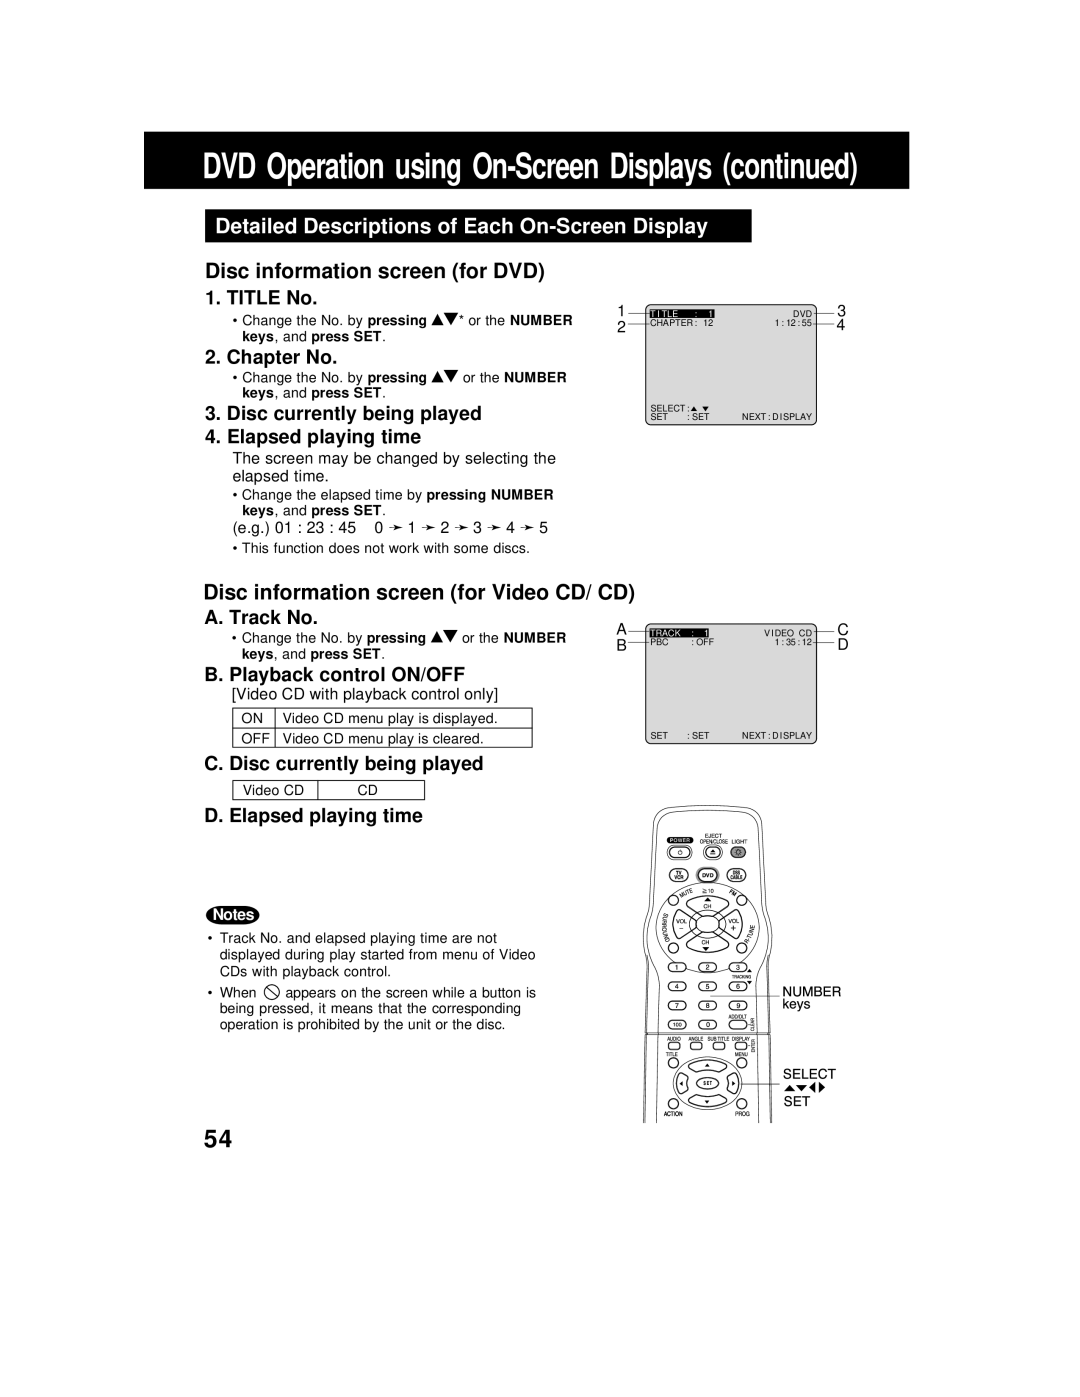 Panasonic AG 527DVDE manual Detailed Descriptions of Each On-Screen Display, Disc information screen for DVD, TITLE No 